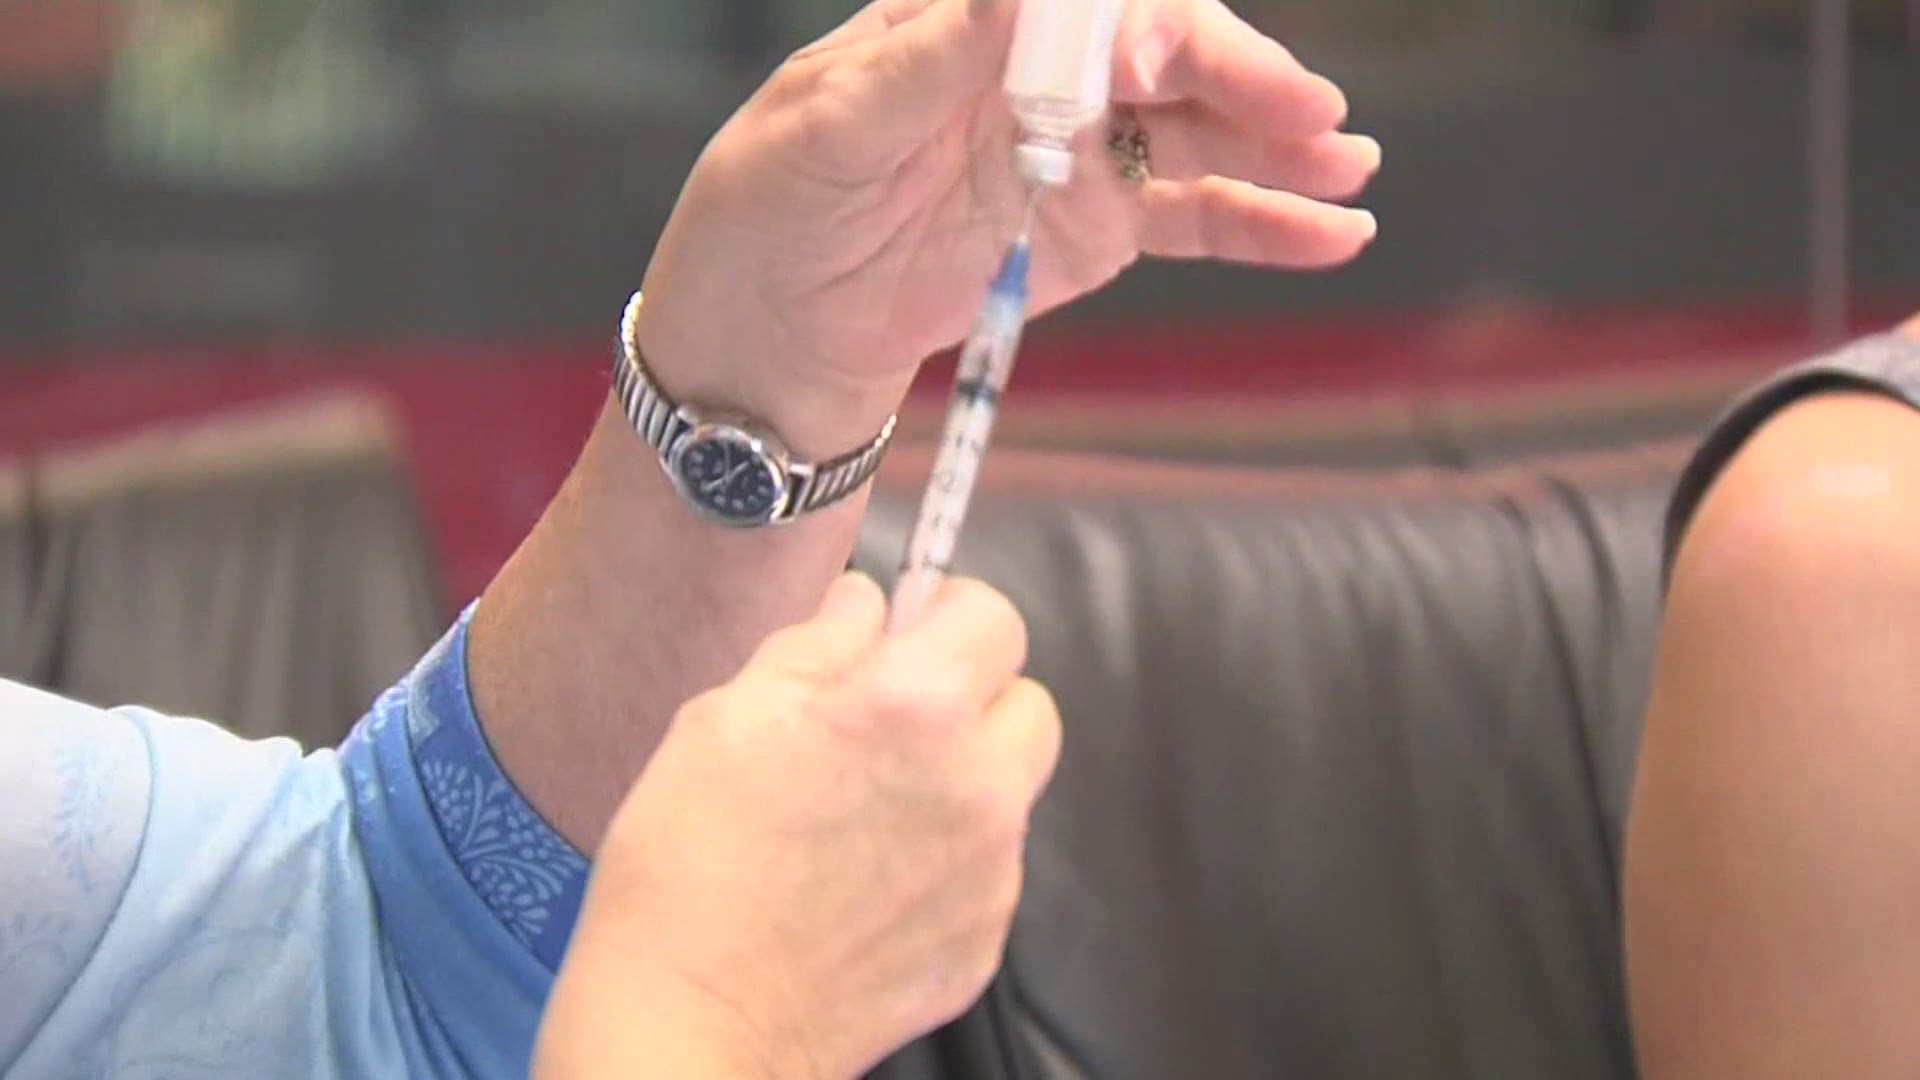 Hard to believe it's that time of year... but flu shots are already available at most pharmacies and clinics.